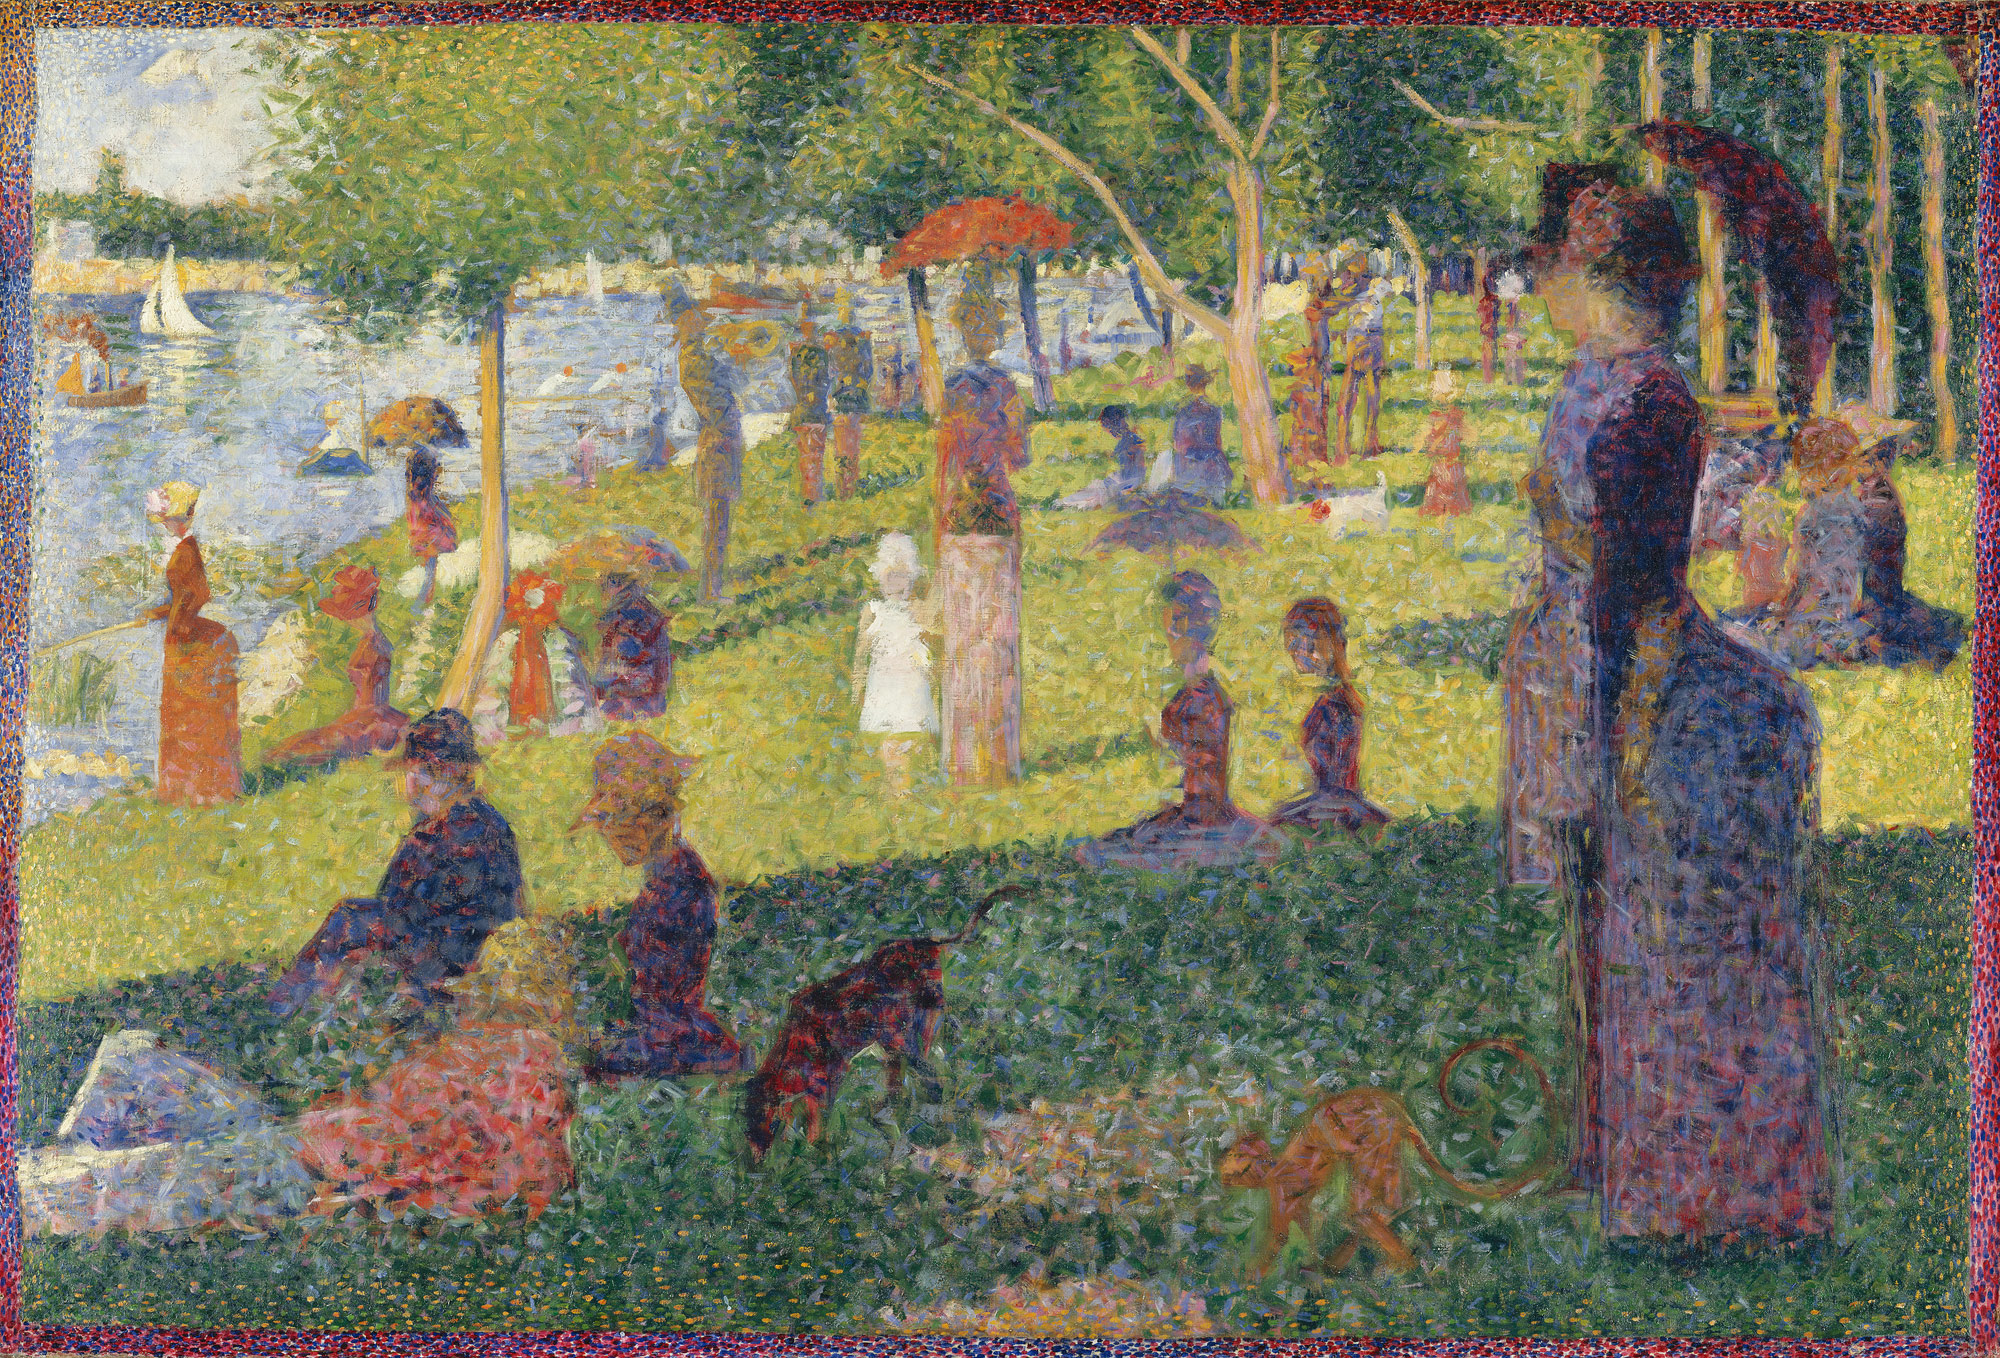 Painting: Sunday in the Park